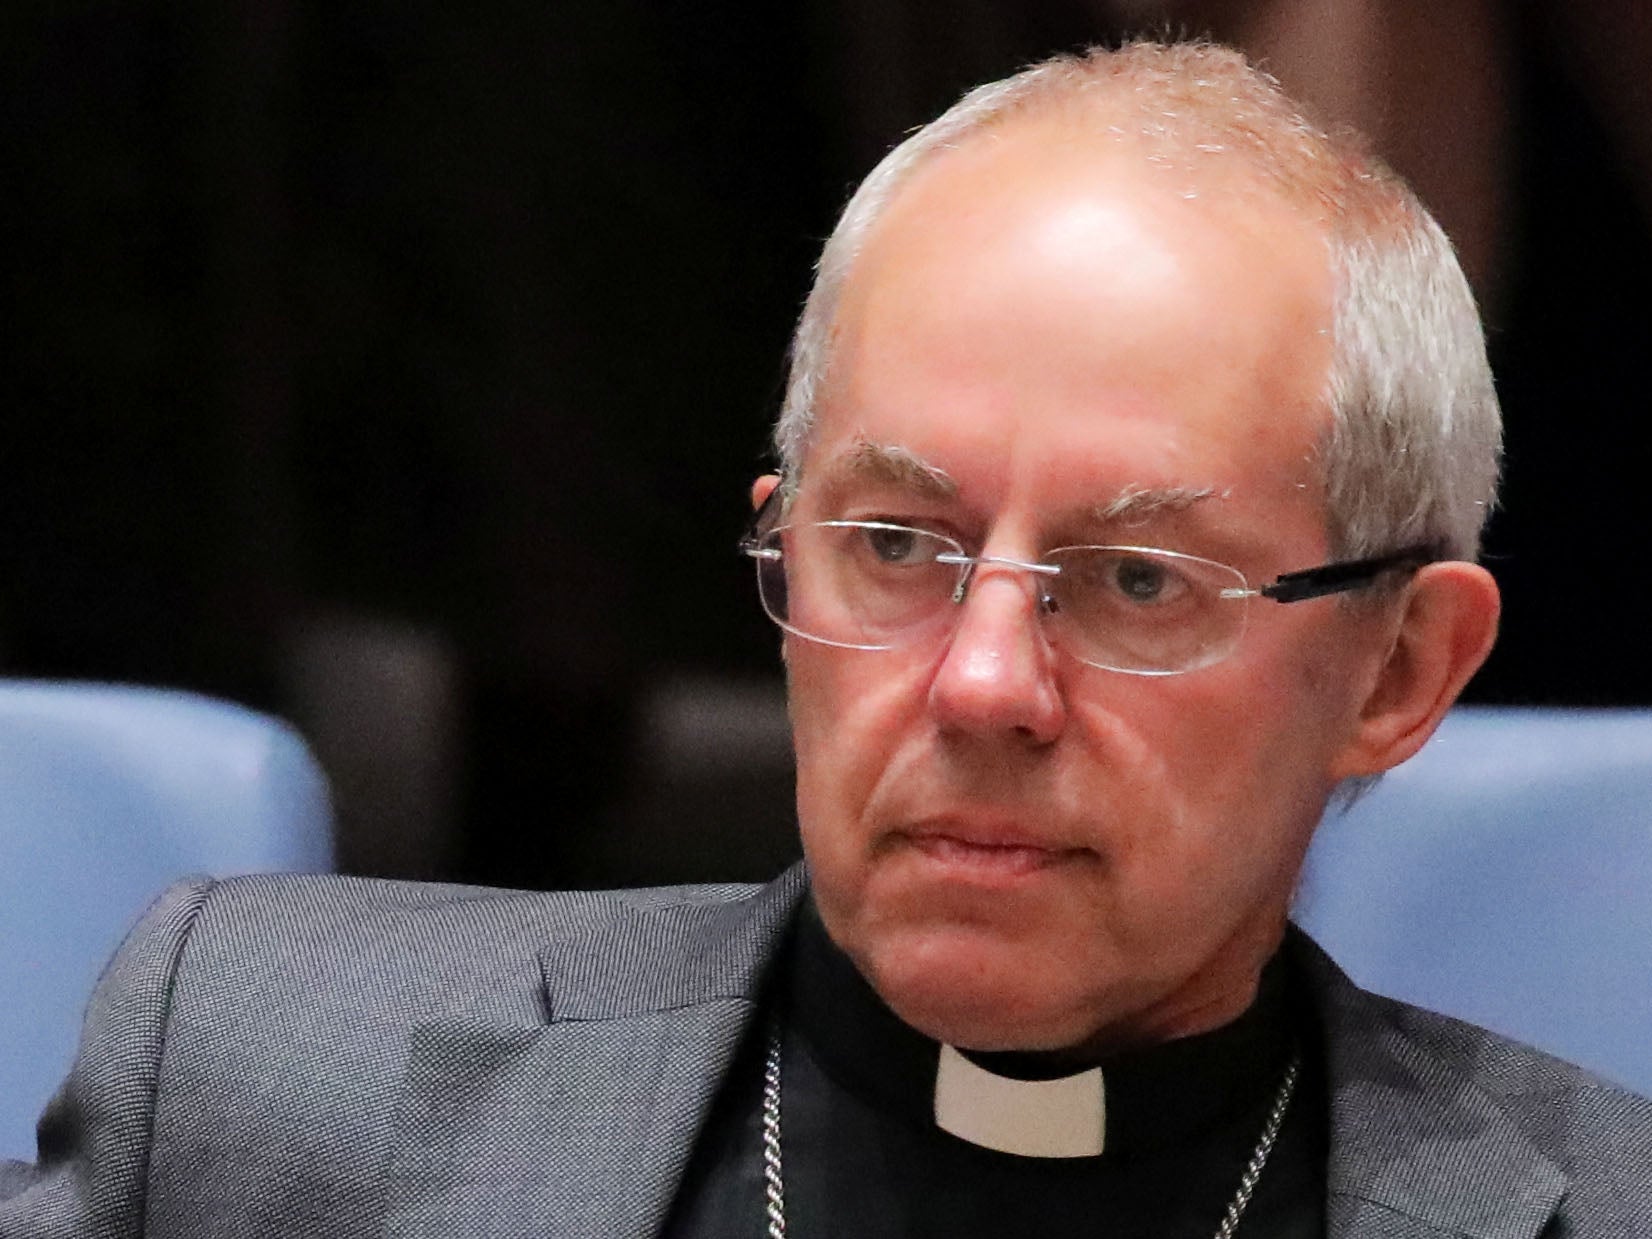 Archbishop of Canterbury Justin Welby